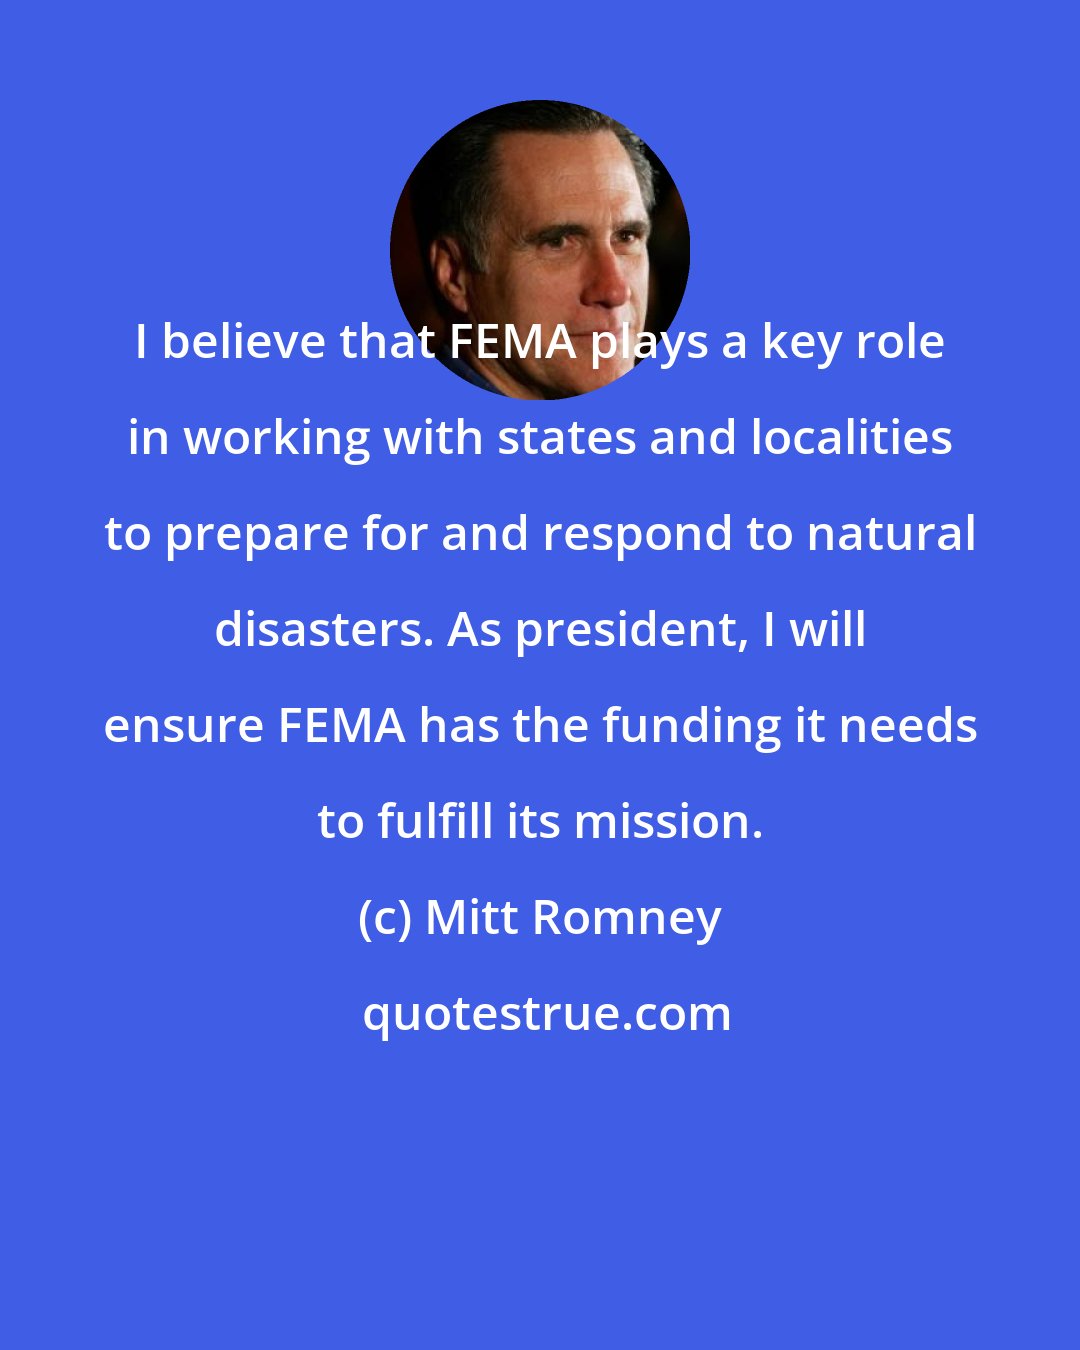 Mitt Romney: I believe that FEMA plays a key role in working with states and localities to prepare for and respond to natural disasters. As president, I will ensure FEMA has the funding it needs to fulfill its mission.